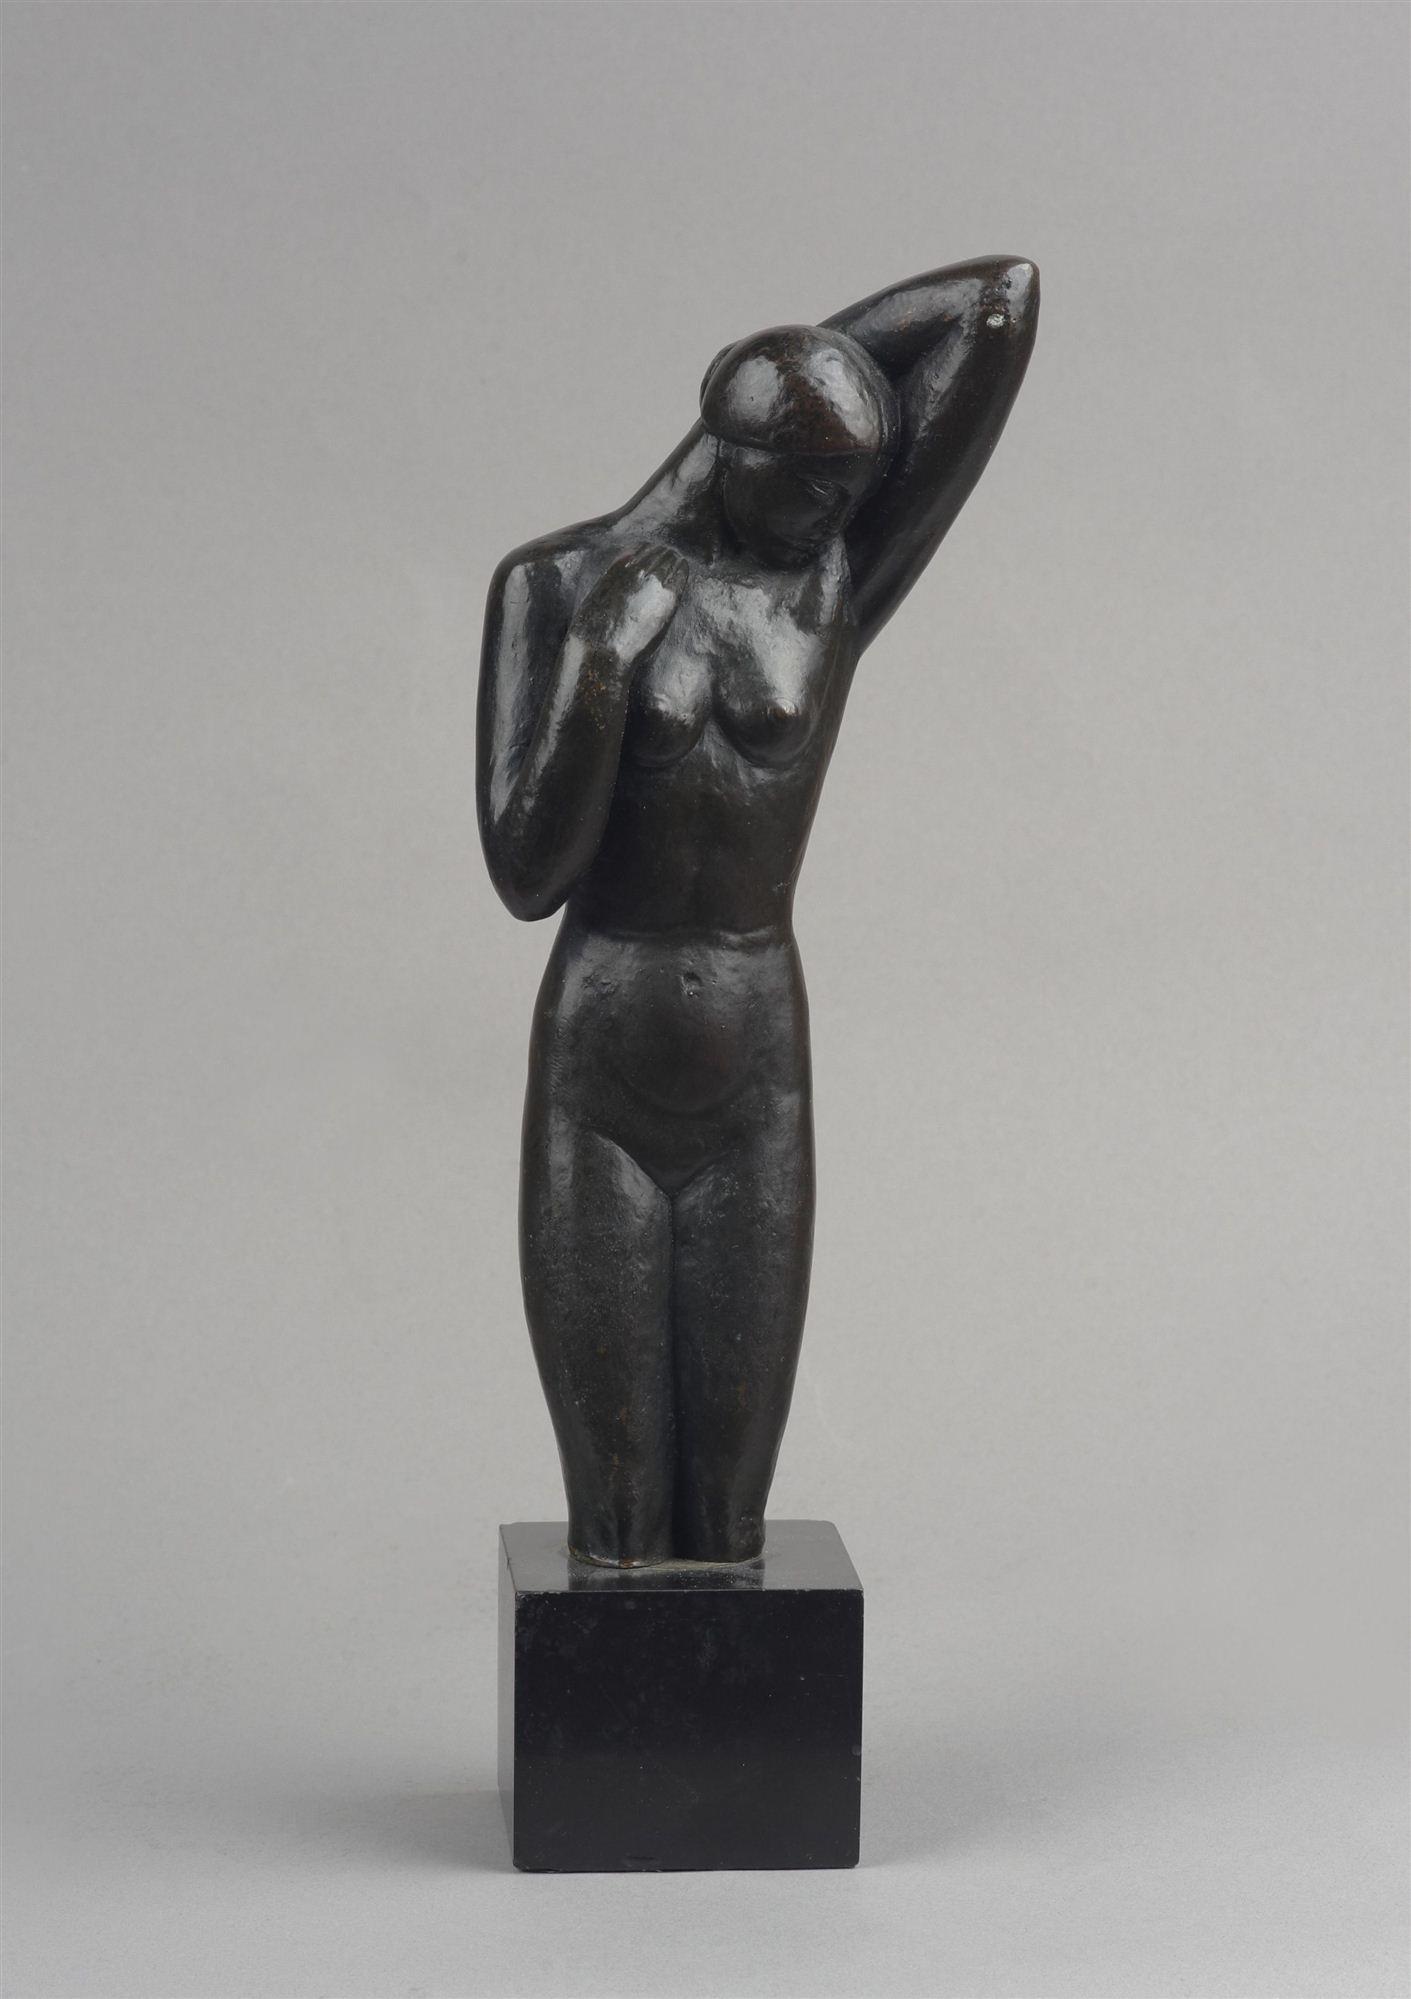 

											American Figurative  </b>

											<em>
												Now on view in New York</em> 

											<h4>
																							</h4>

		                																																													<i>John Storrs,</i>  
																																								Female Nude, 1935-39, 
																																								Bronze, 
																																								11 1/8 inches high including black marble base 
																								
		                				